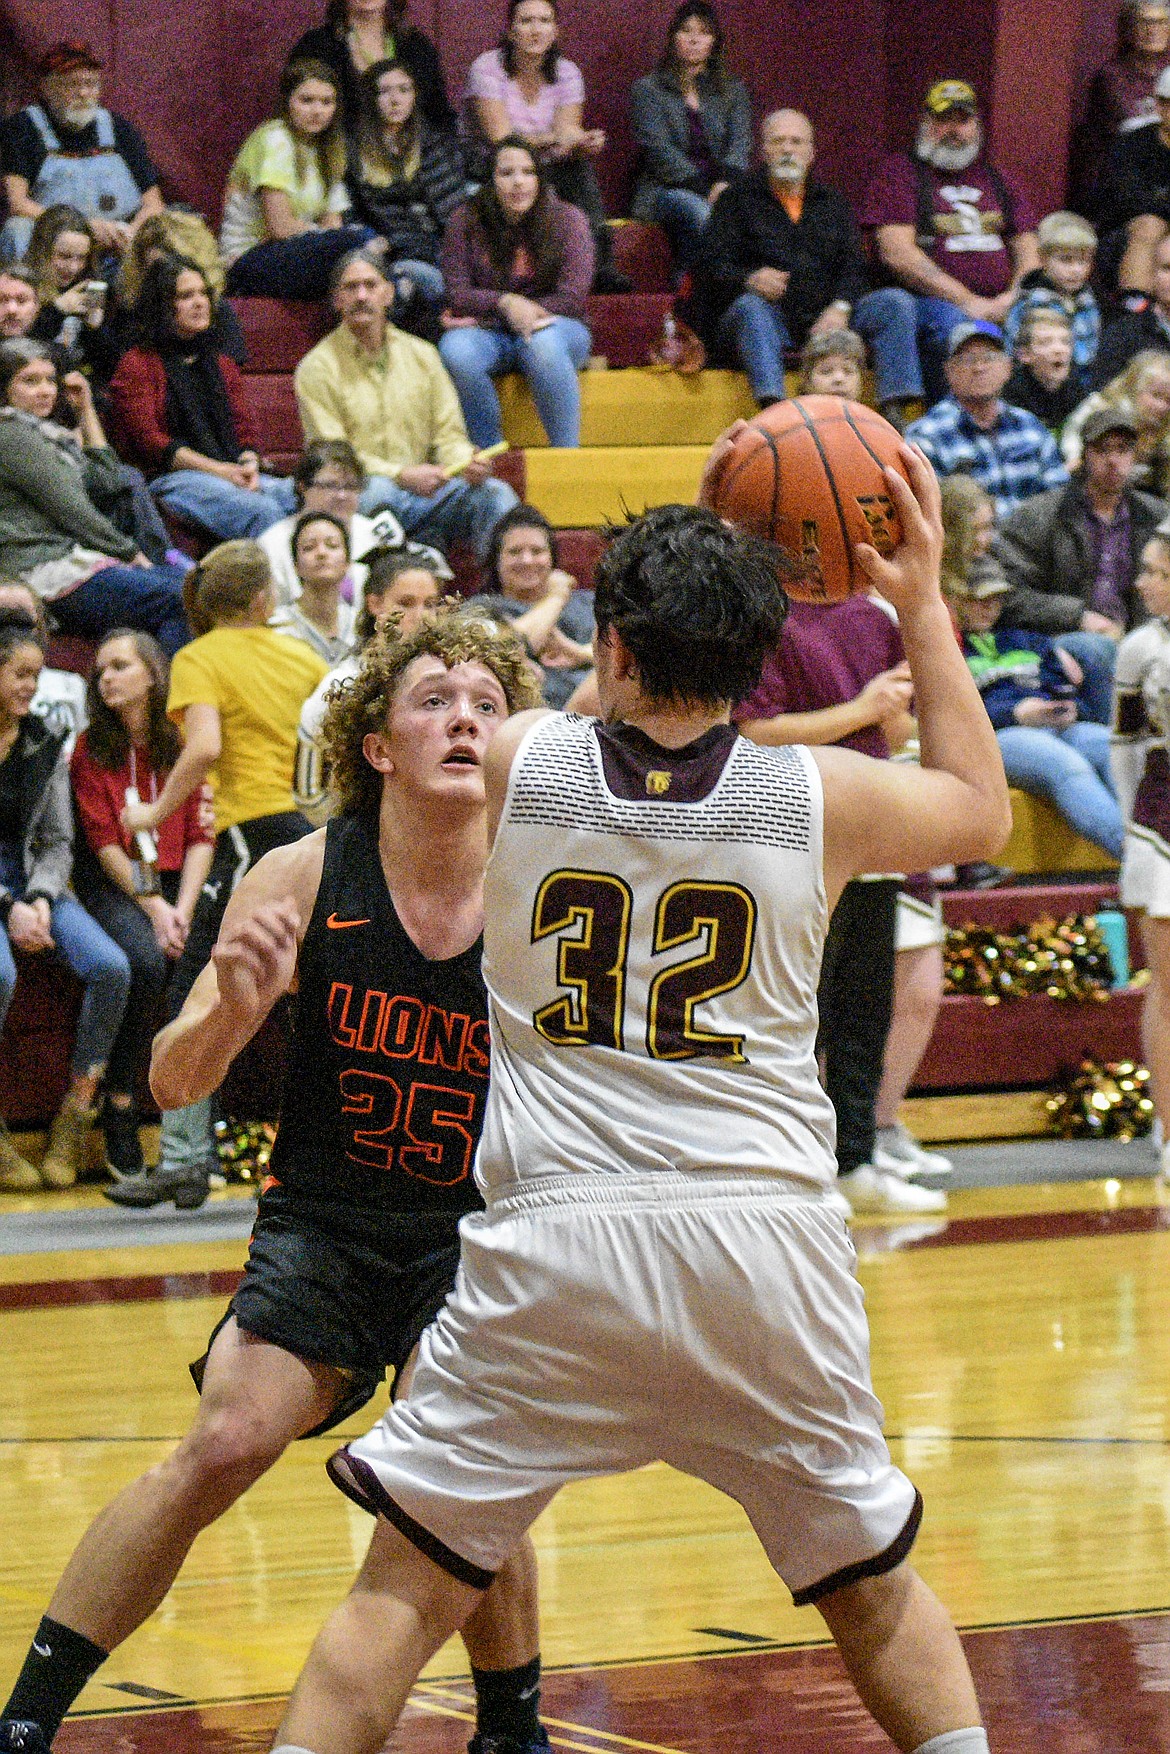 Troy senior Tyler Gromley fakes high before going low and in for a layup against Eureka early in the second quarter Saturday. (Ben Kibbey/The Western News)